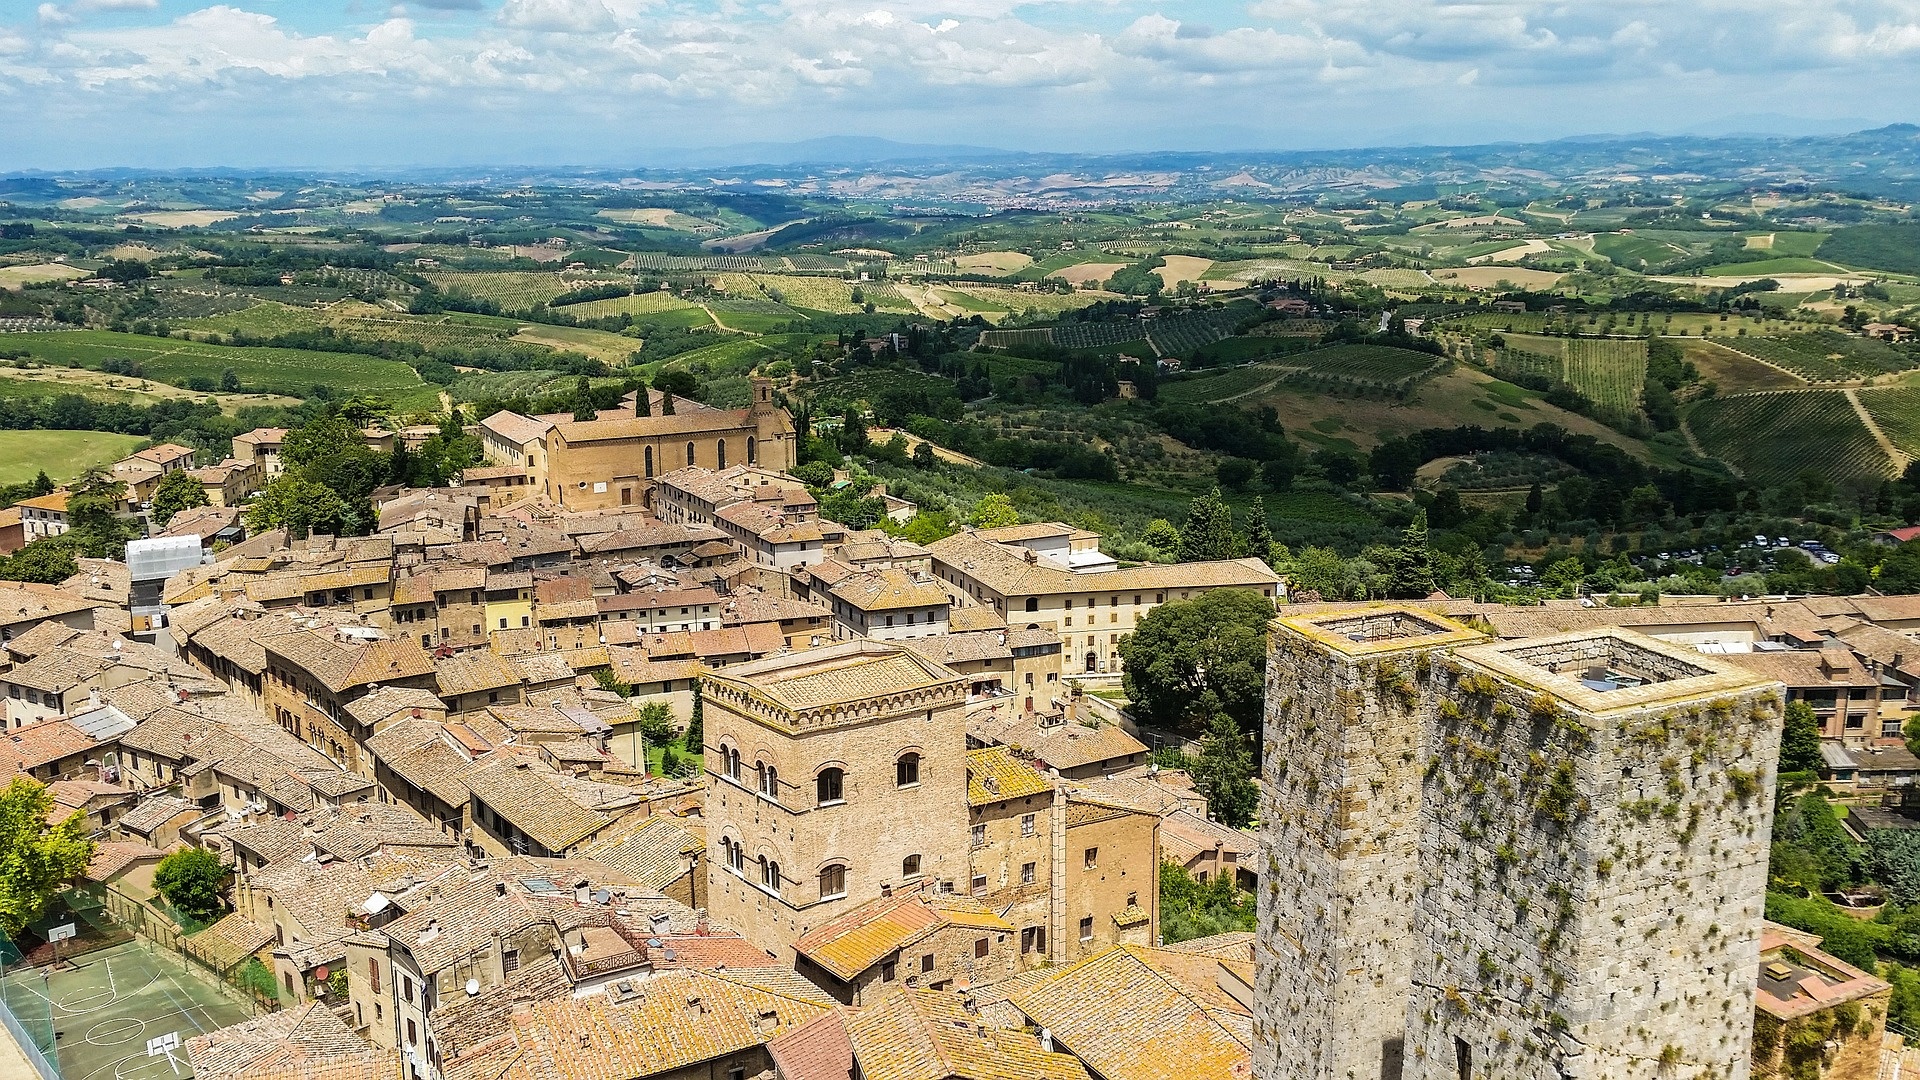 San Gimignano, Group tour package, Architecture and culture, Local history, 1920x1080 Full HD Desktop